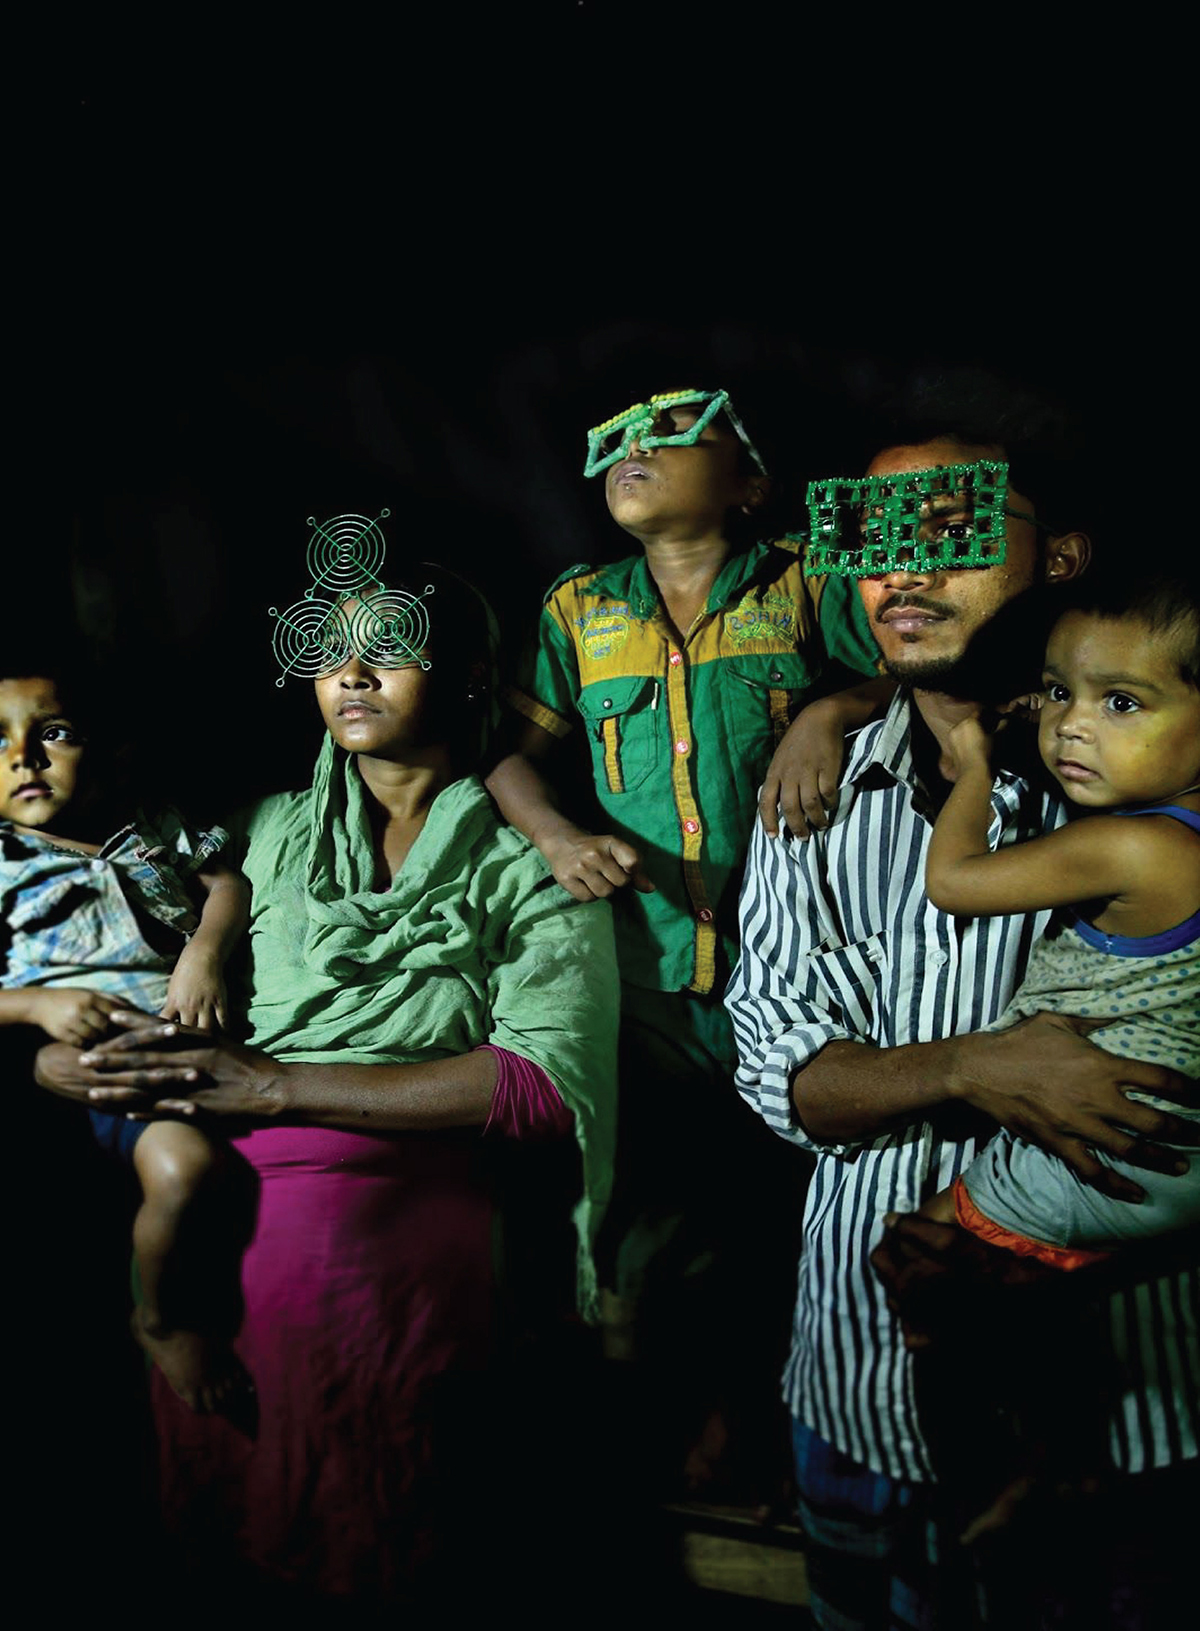 A family with children wearing large green glasses in a dark room